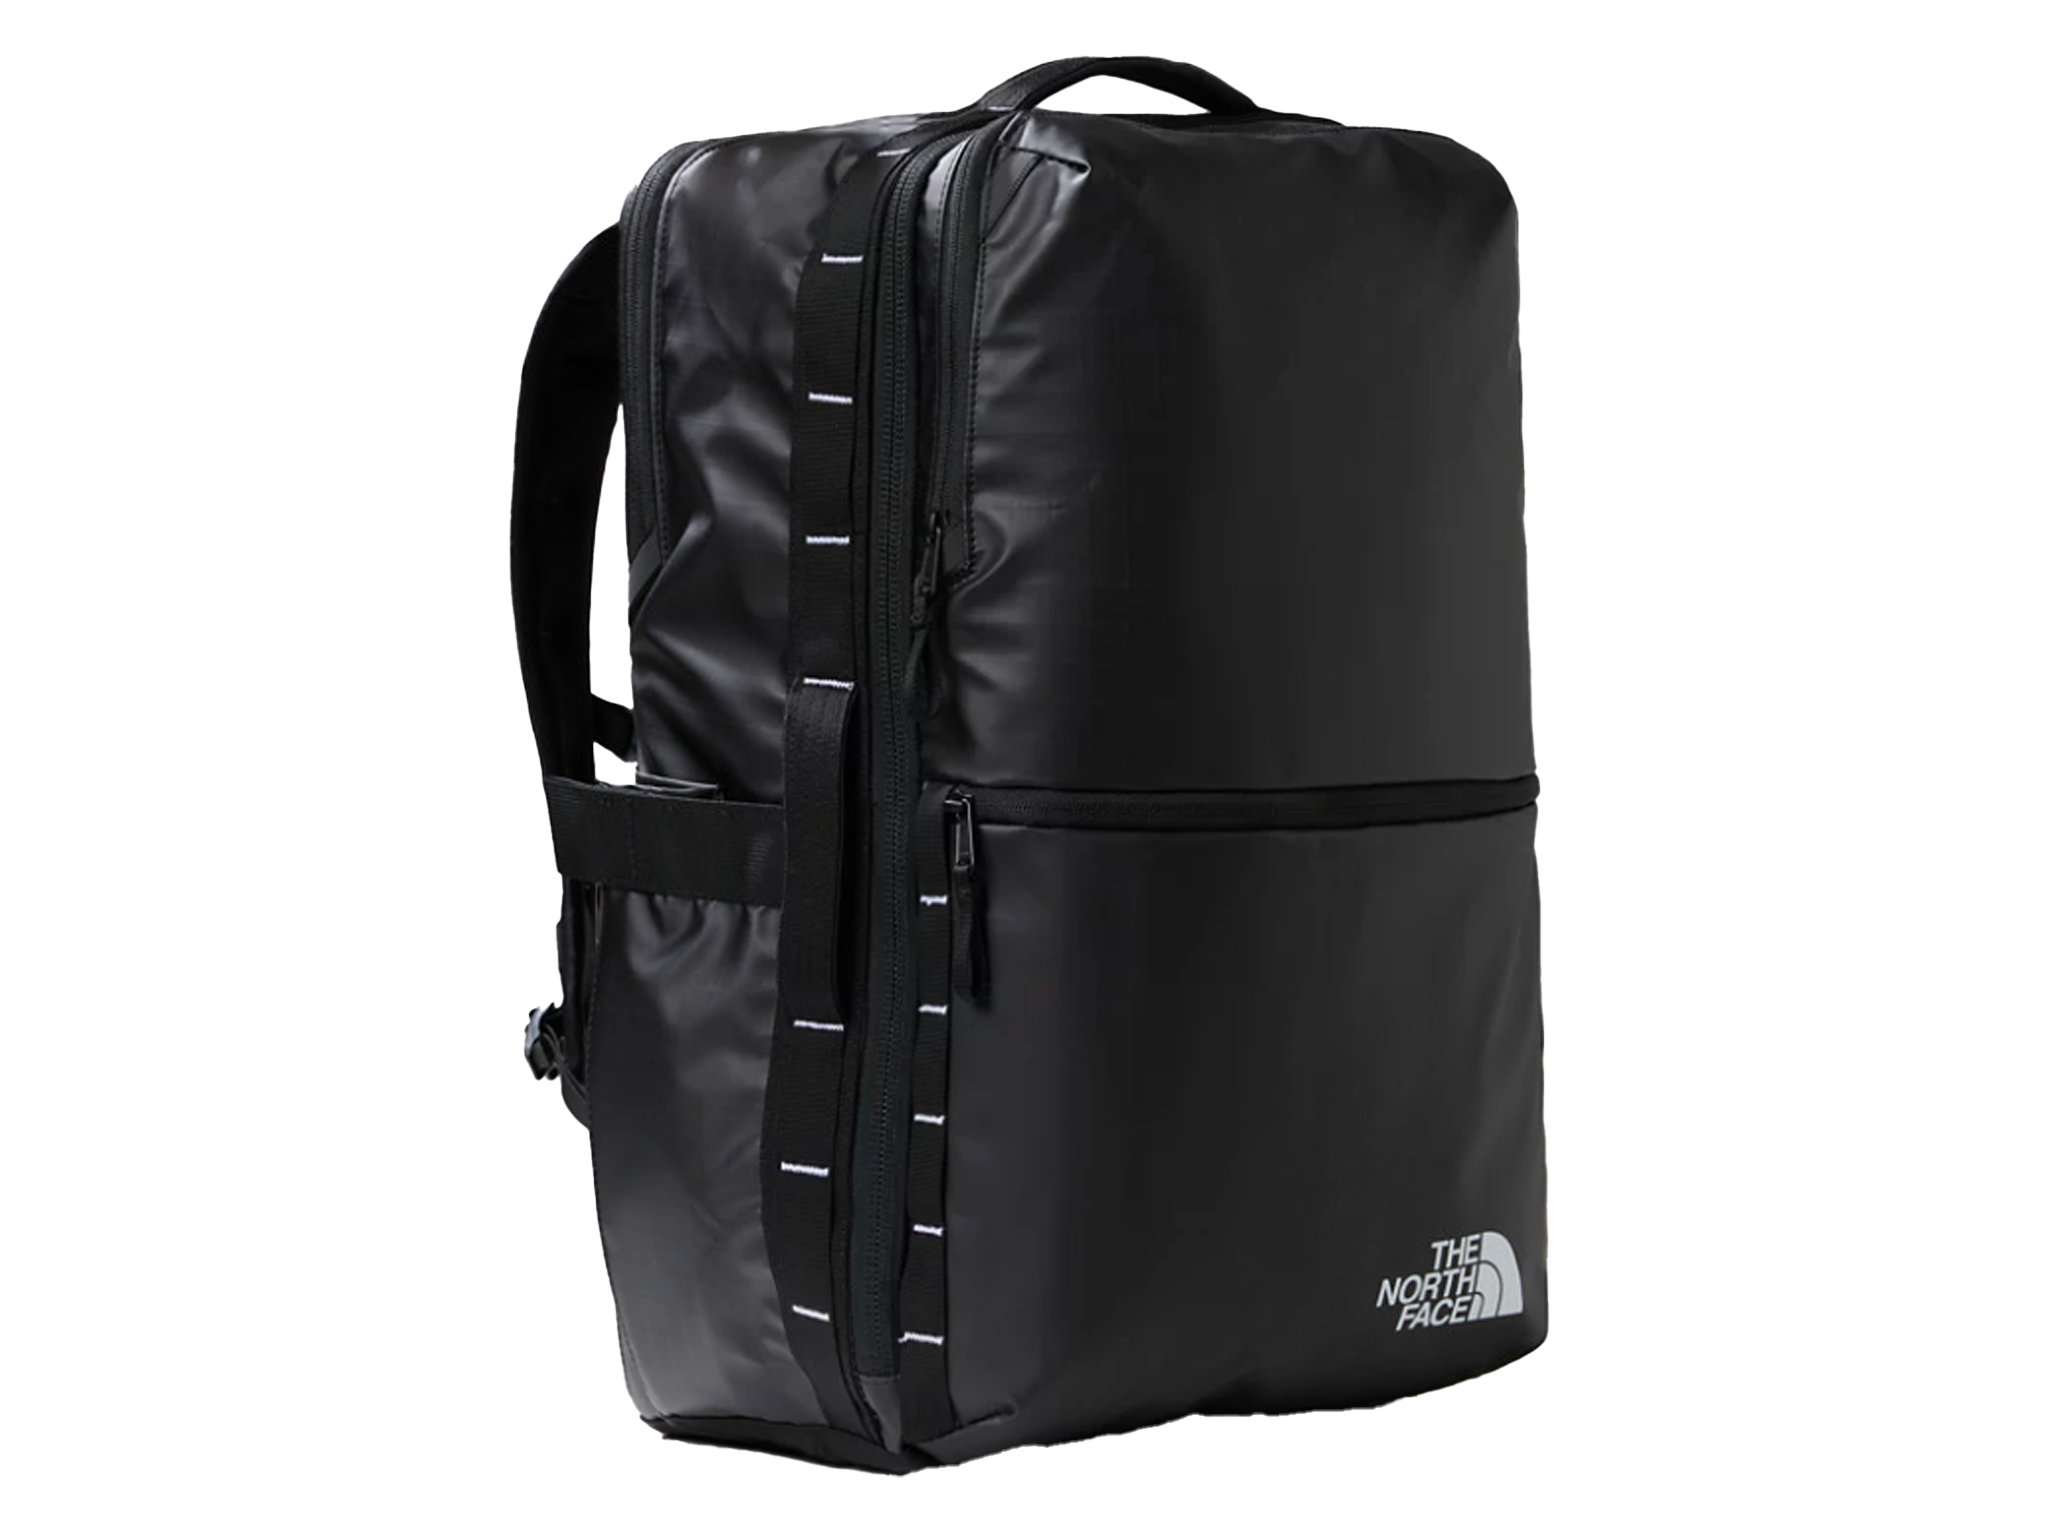 North-face-backpack-indybest